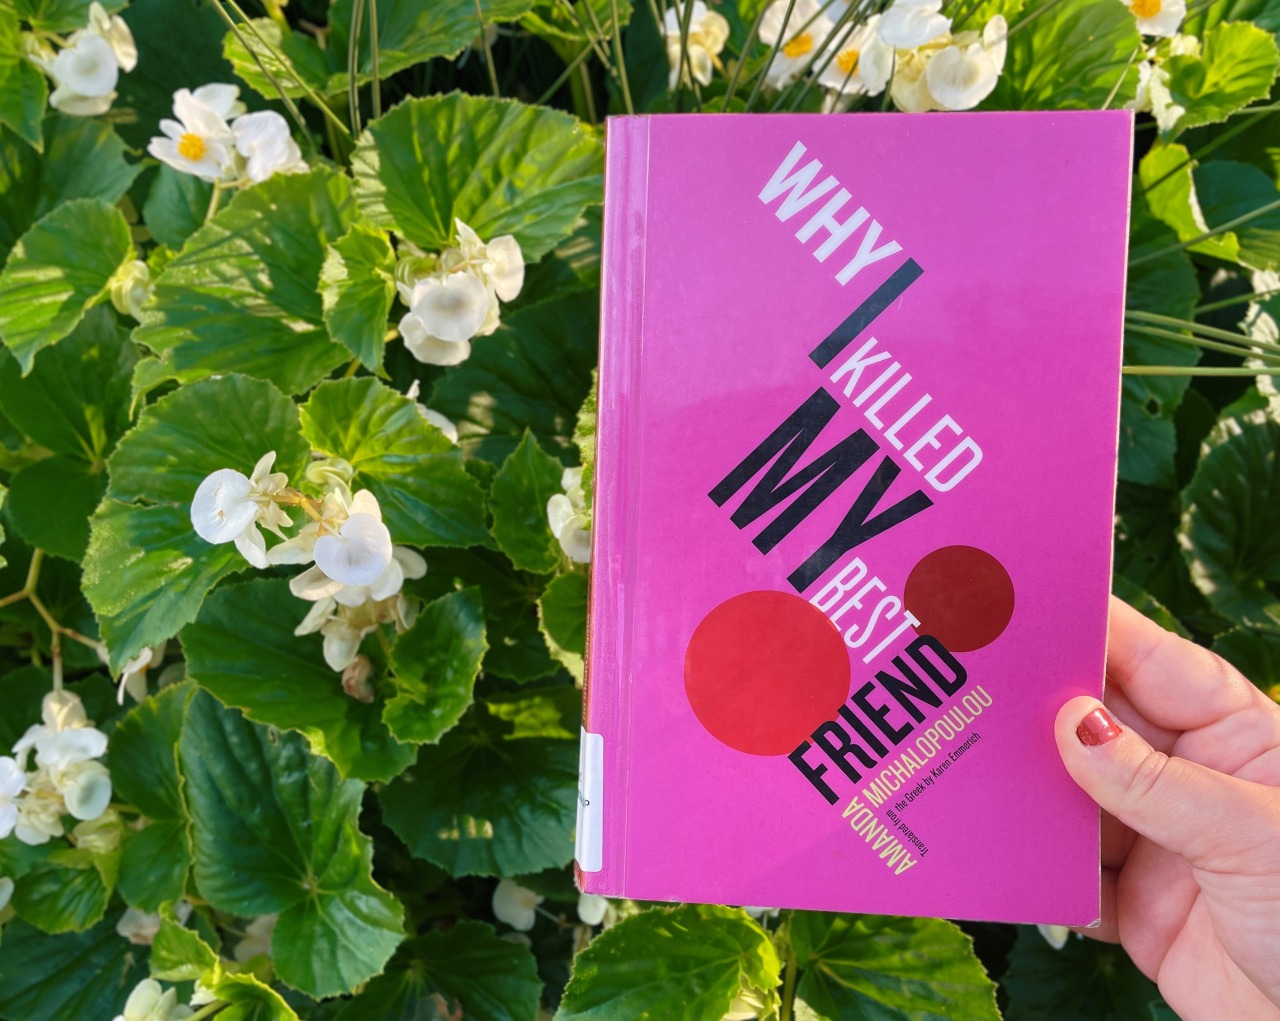 Why I Killed My Best Friend by Amanda Michalopoulou, translated by Karen Emmerich, is a vivid book about the personal and societal politics of power. Maria is an anarchist and activist who teaches children in order to pay the bills—when a wild child...